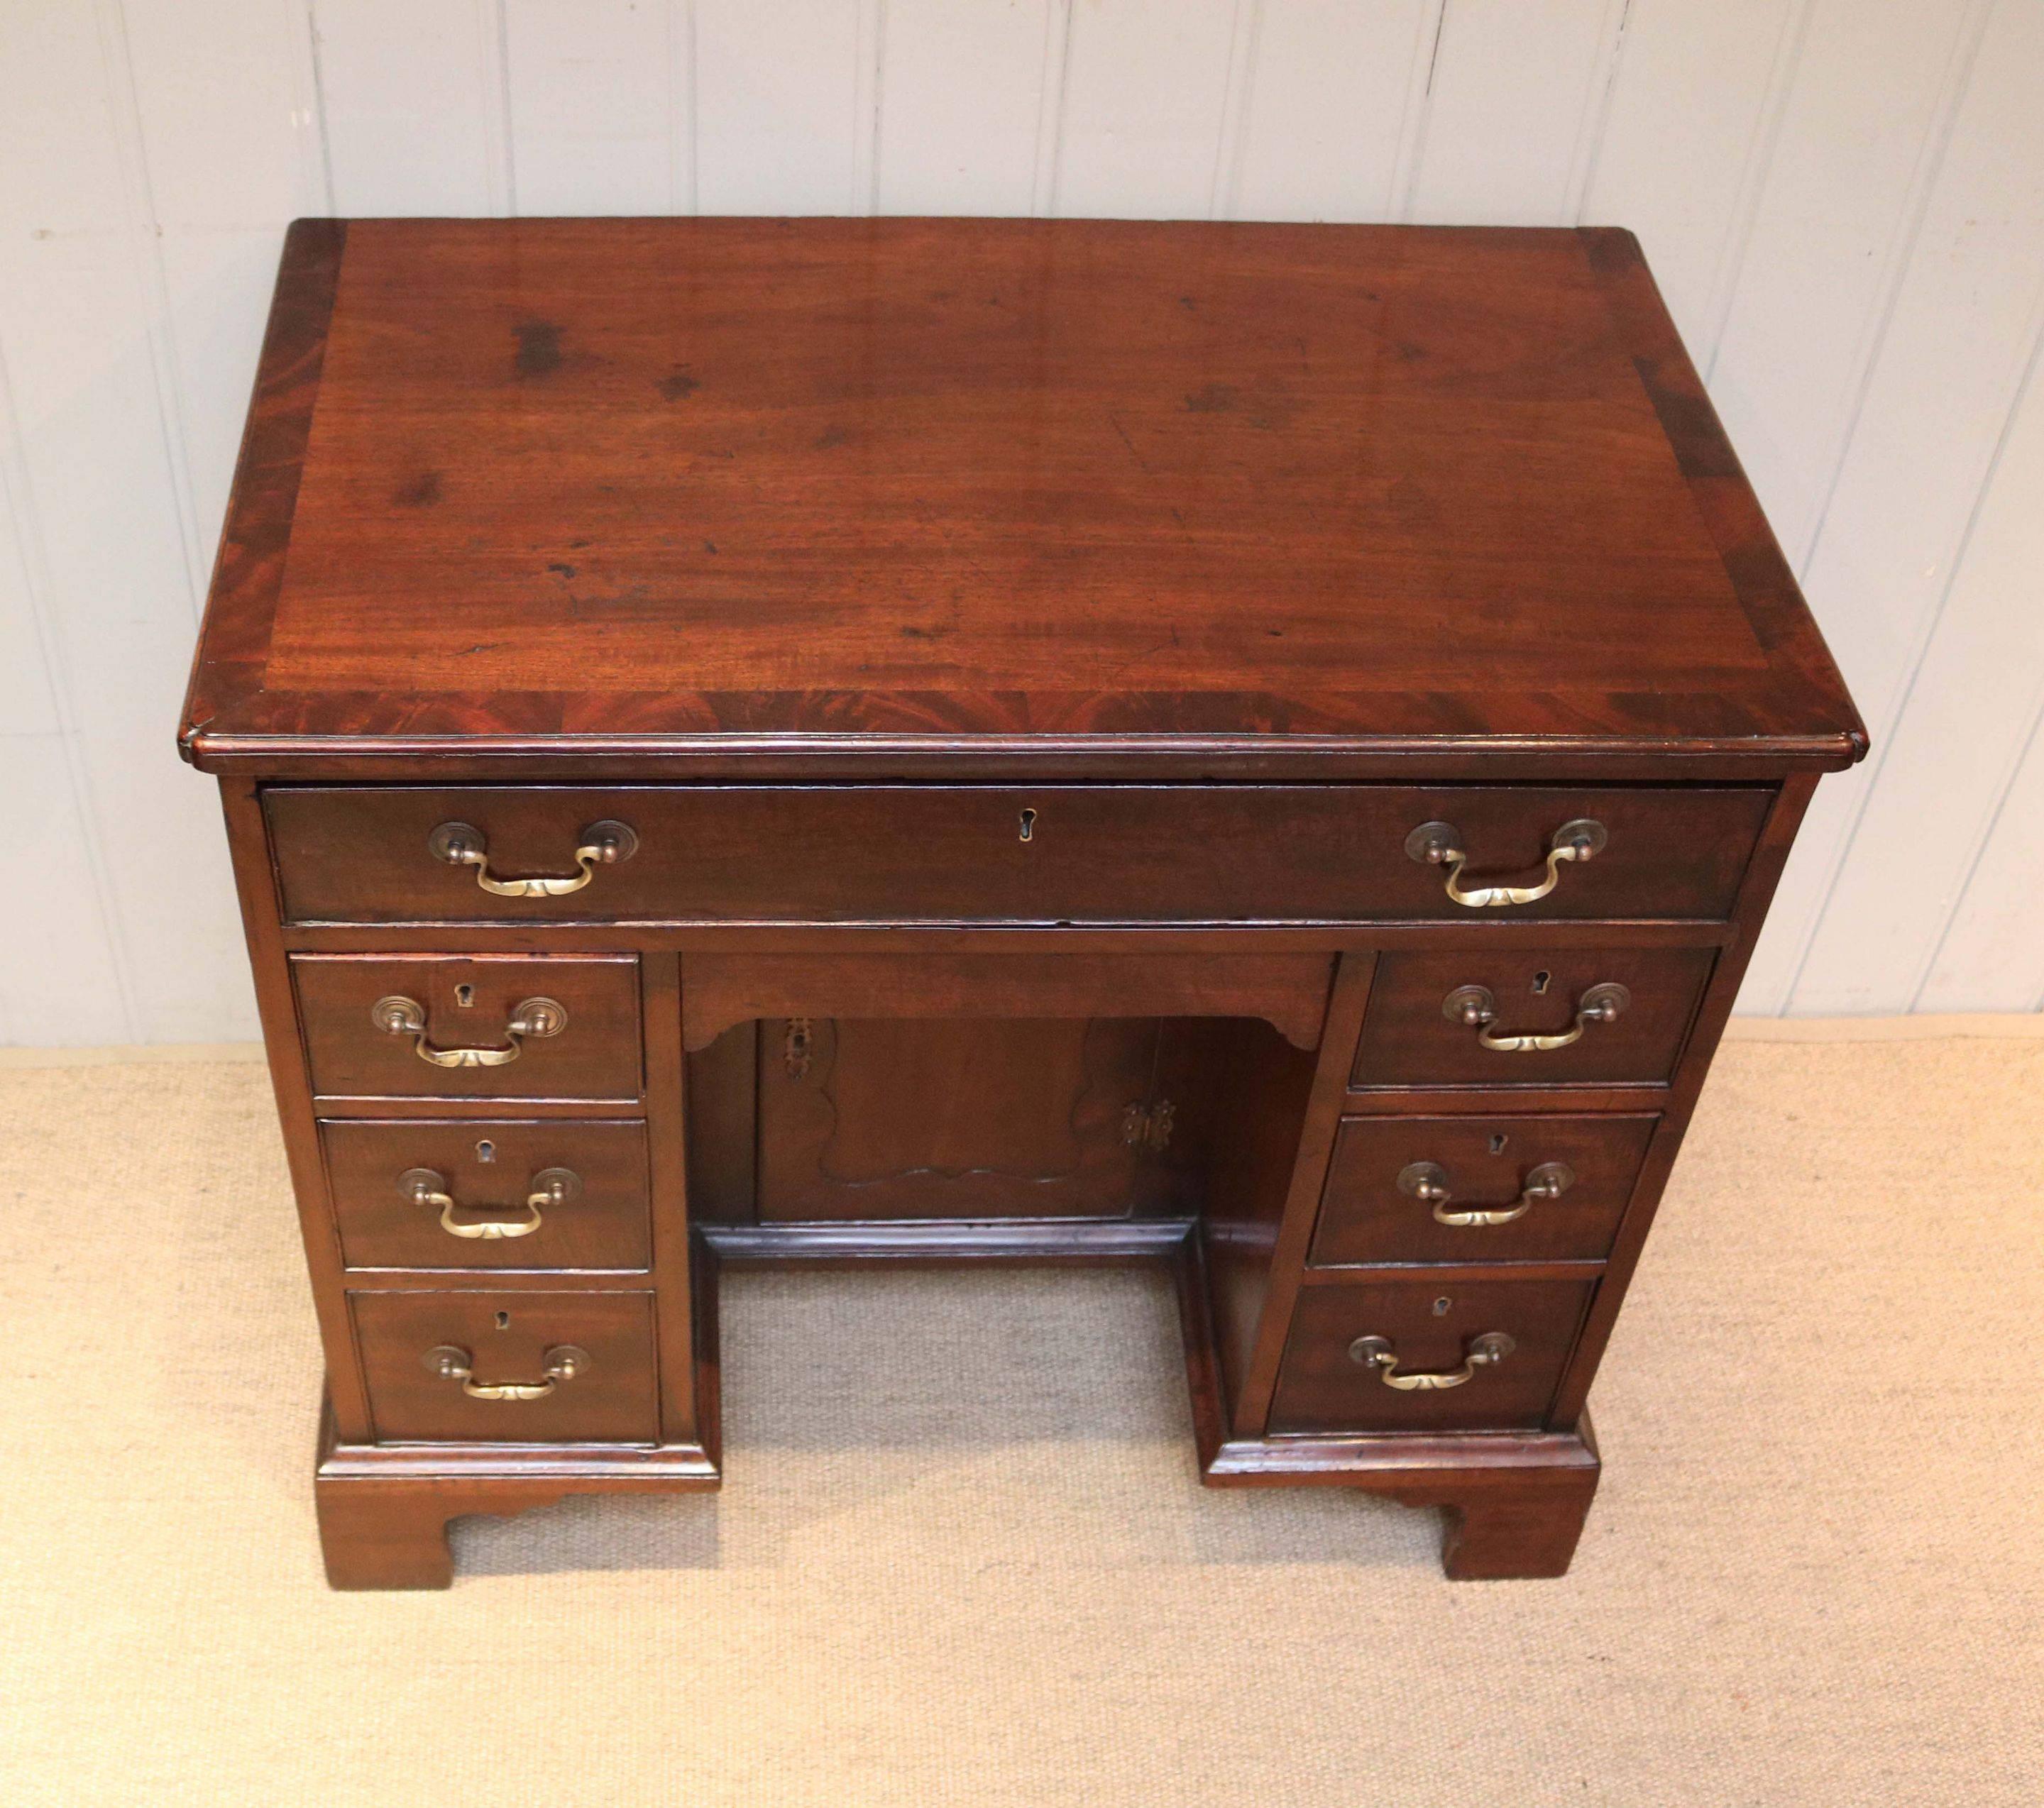 Georgian kneehole desk having a figure crossbanded top with an arrangement of eight oak lined drawers, including a secret frieze drawer, around a central recessed cupboard. Raised on bracket feet.